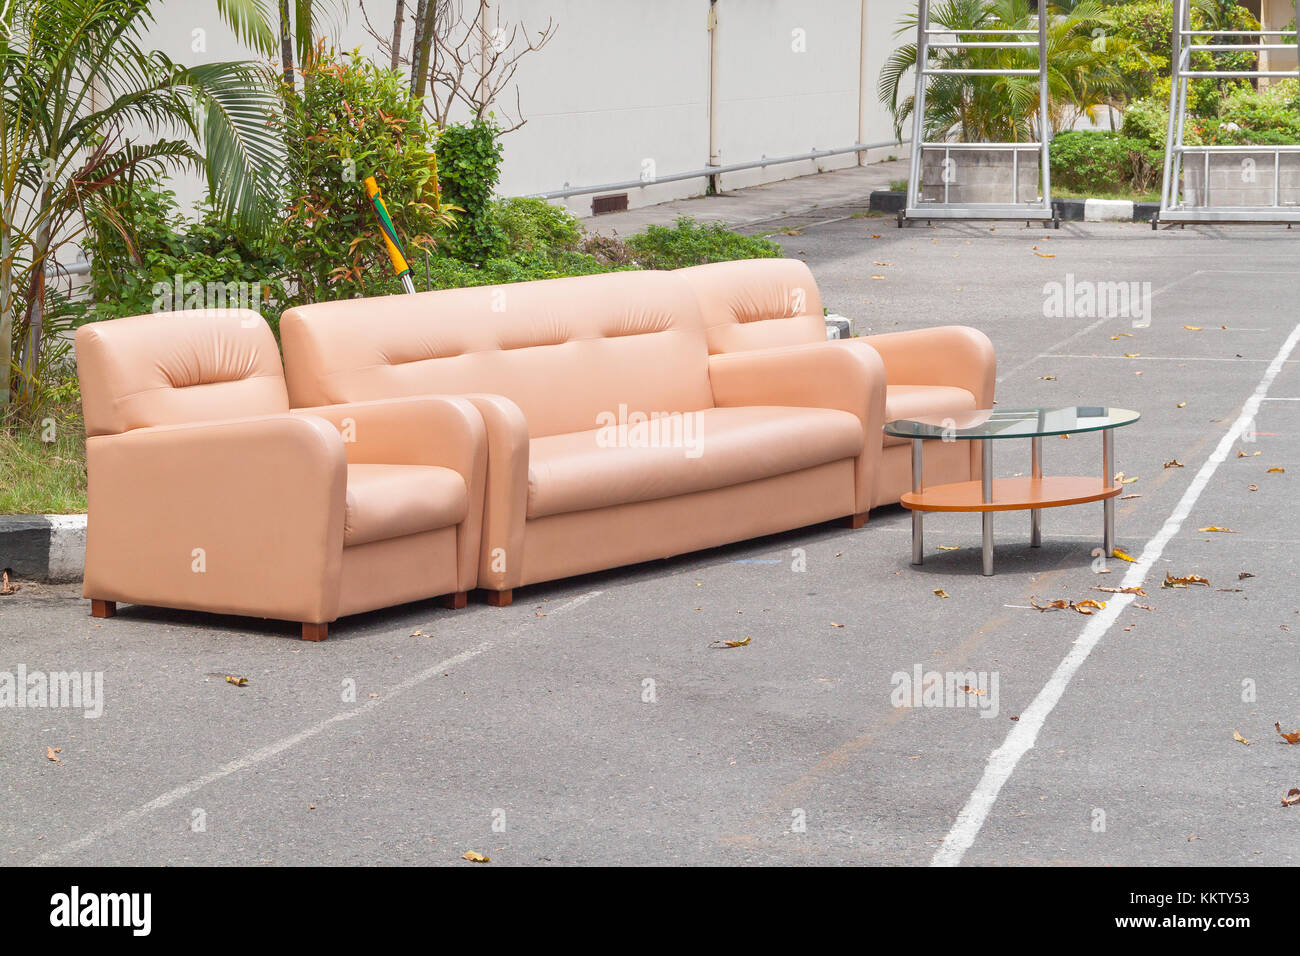 Leather sofa,Orange sofa placed outside in the launch business Stock Photo  - Alamy